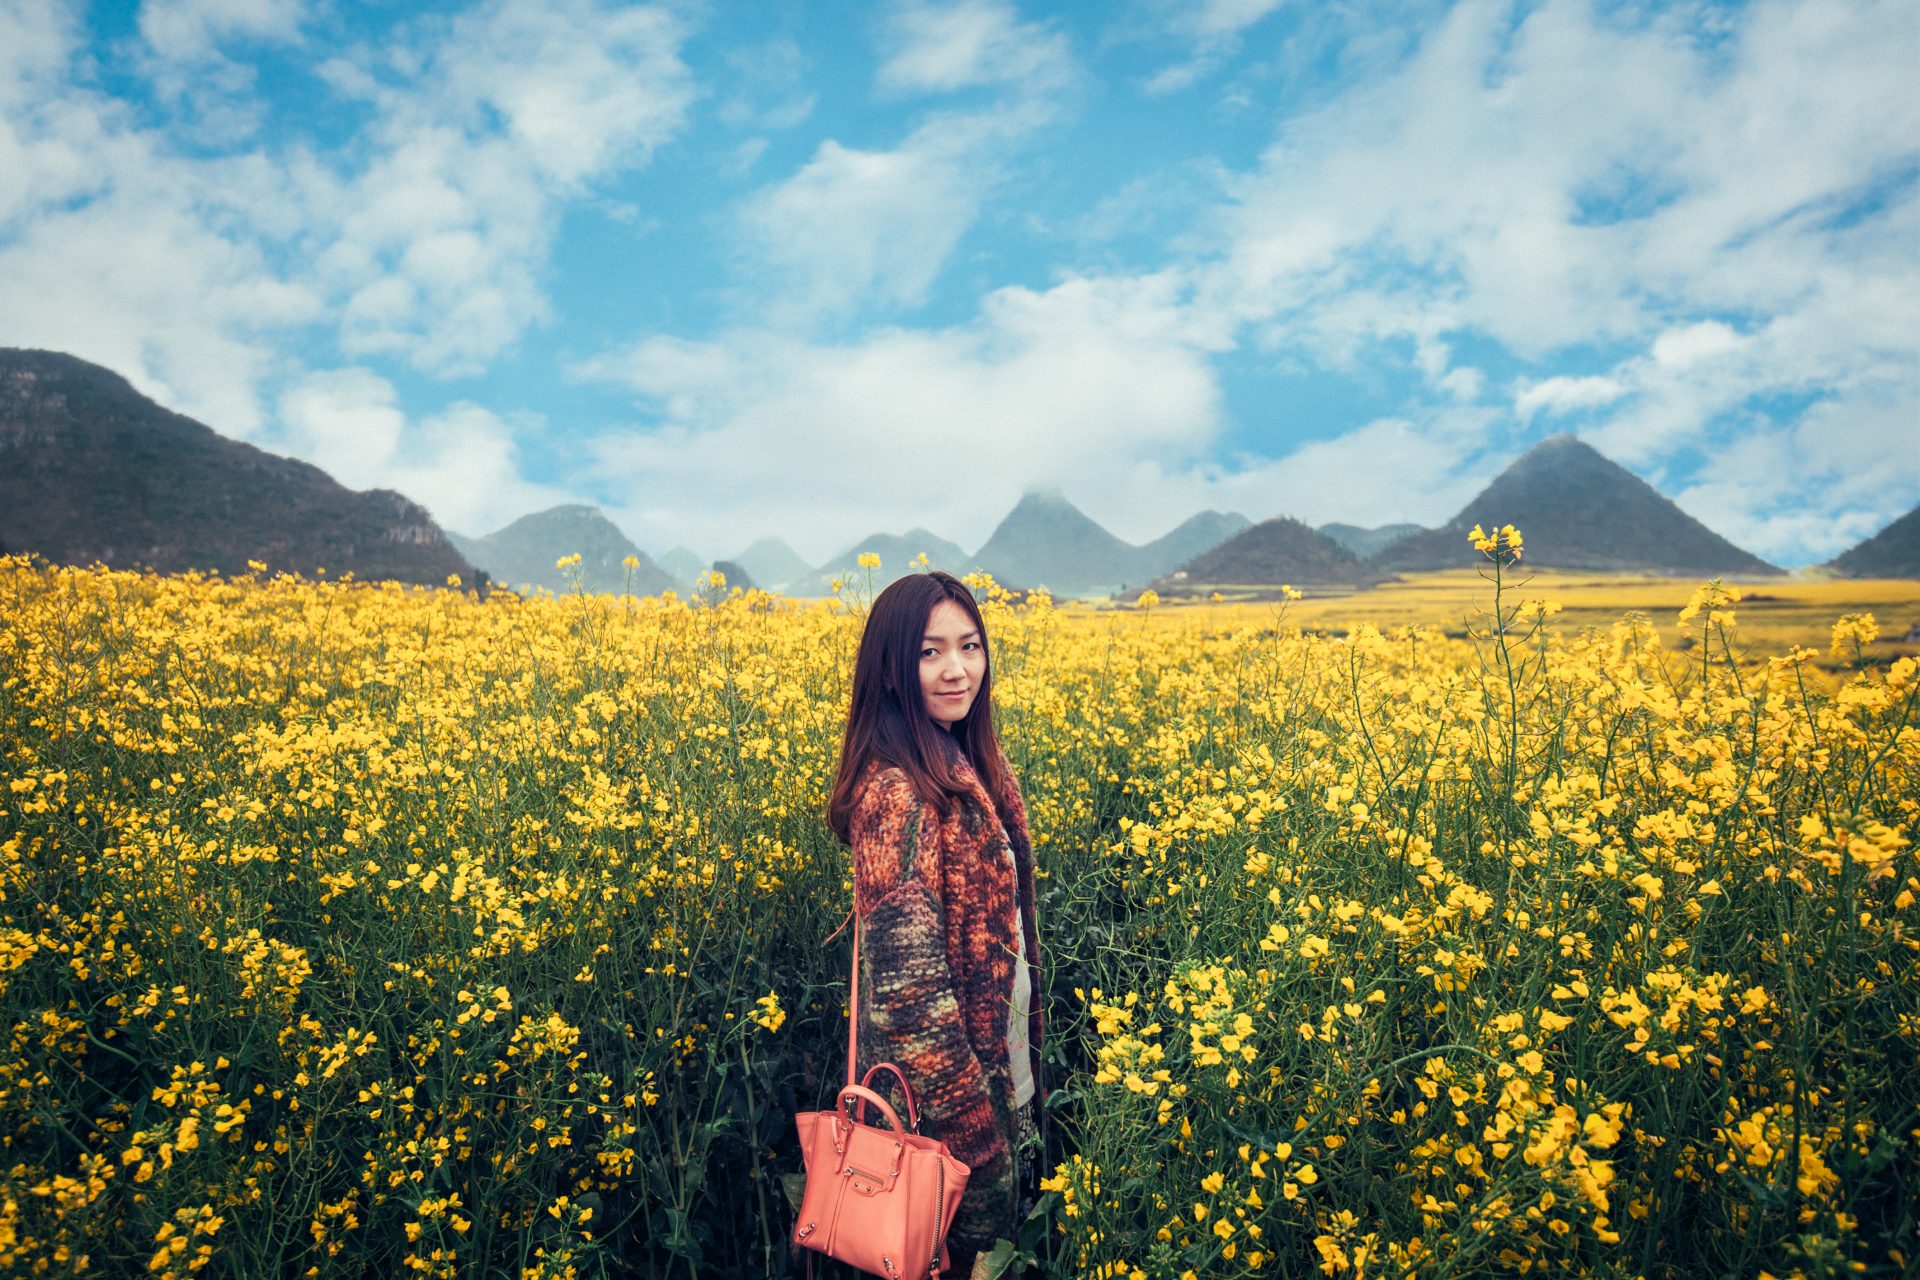 Canola flower fields in China 